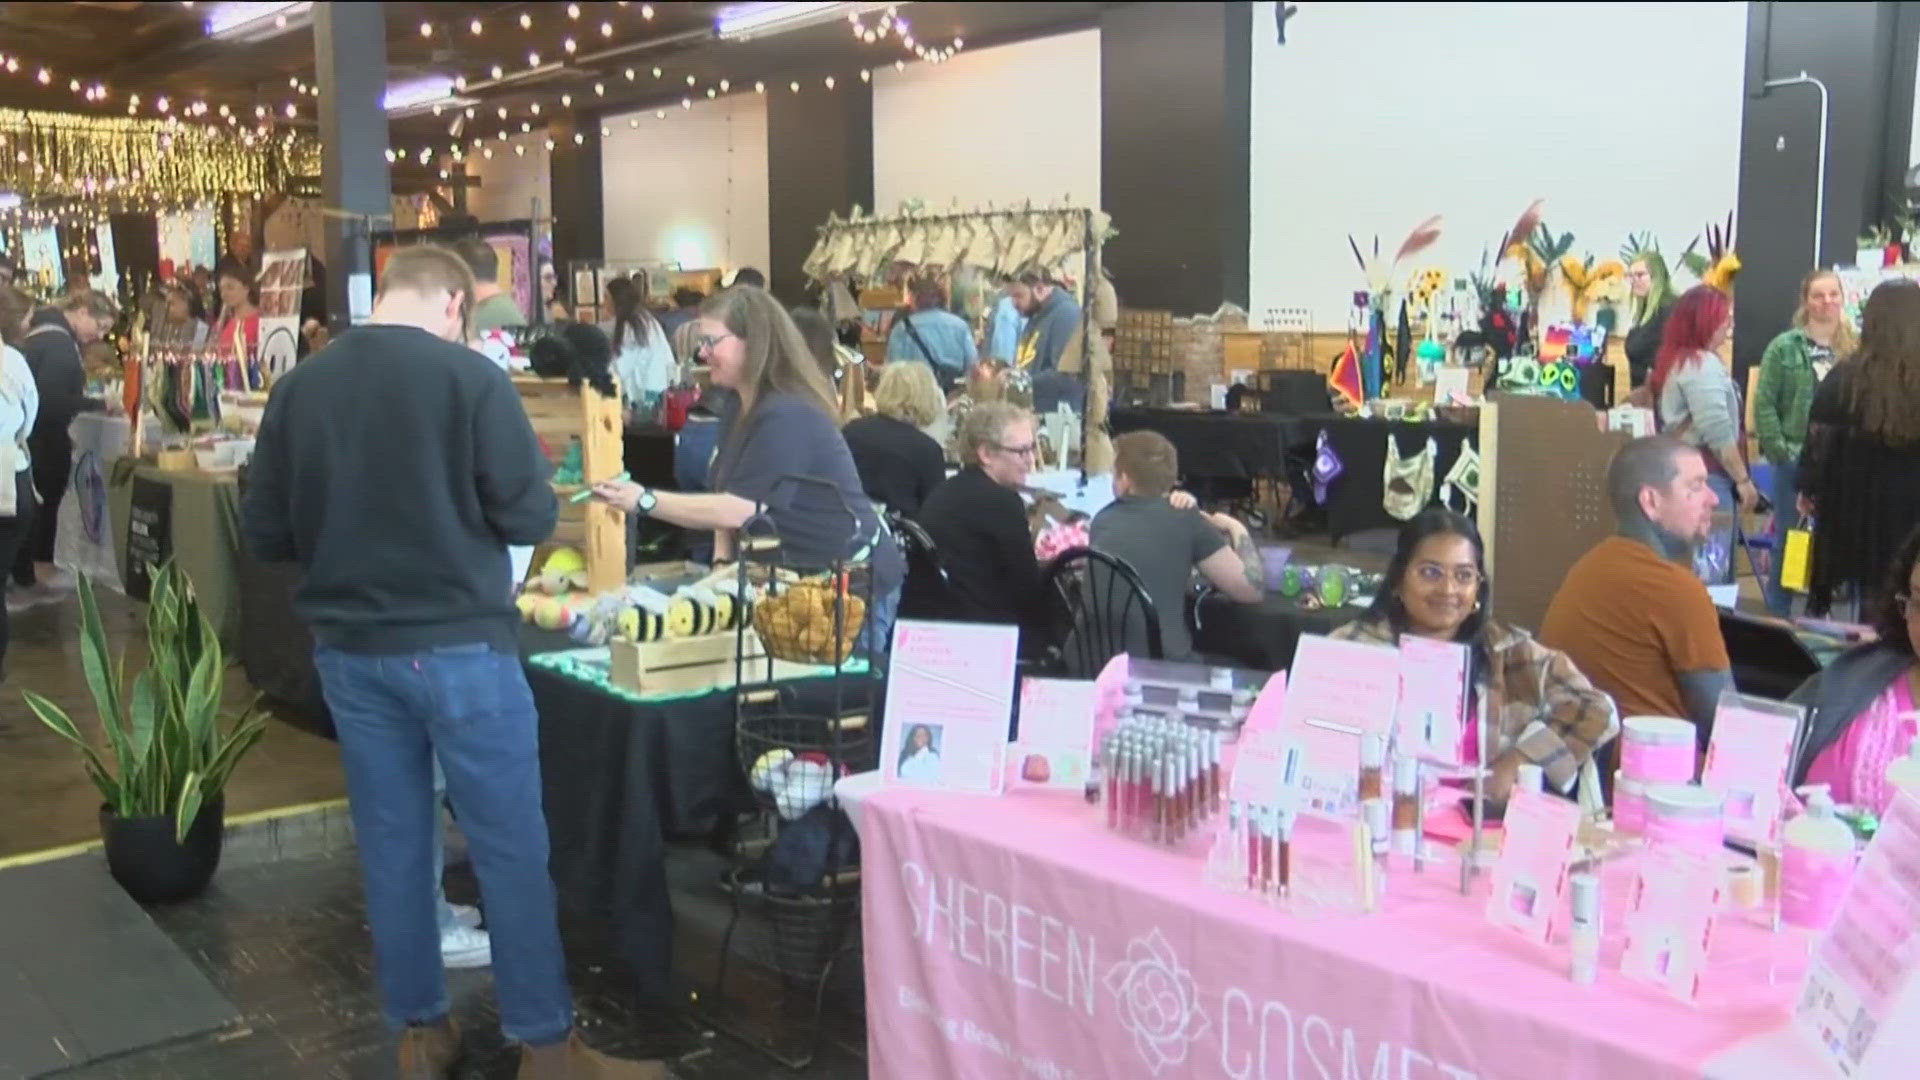 Handmade Toledo celebrated the works of local artists with a maker's mark.